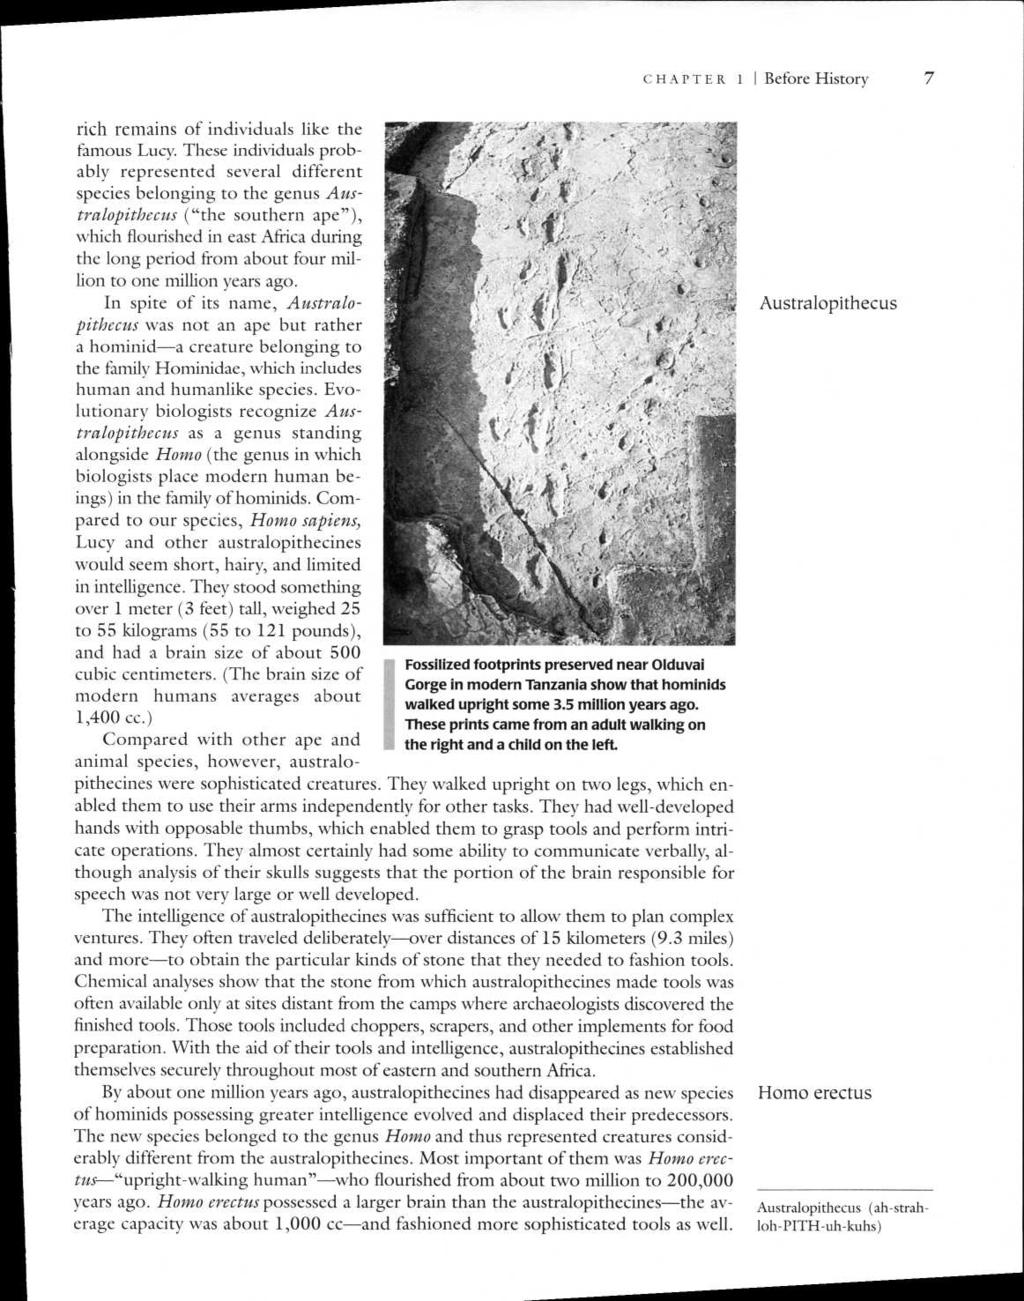 CHAPTER 1 I Before History 7 Fossilized footprints preserved near Olduvai Gorge in modern Tanzania show that hominids walked upright some 3.5 million years ago.